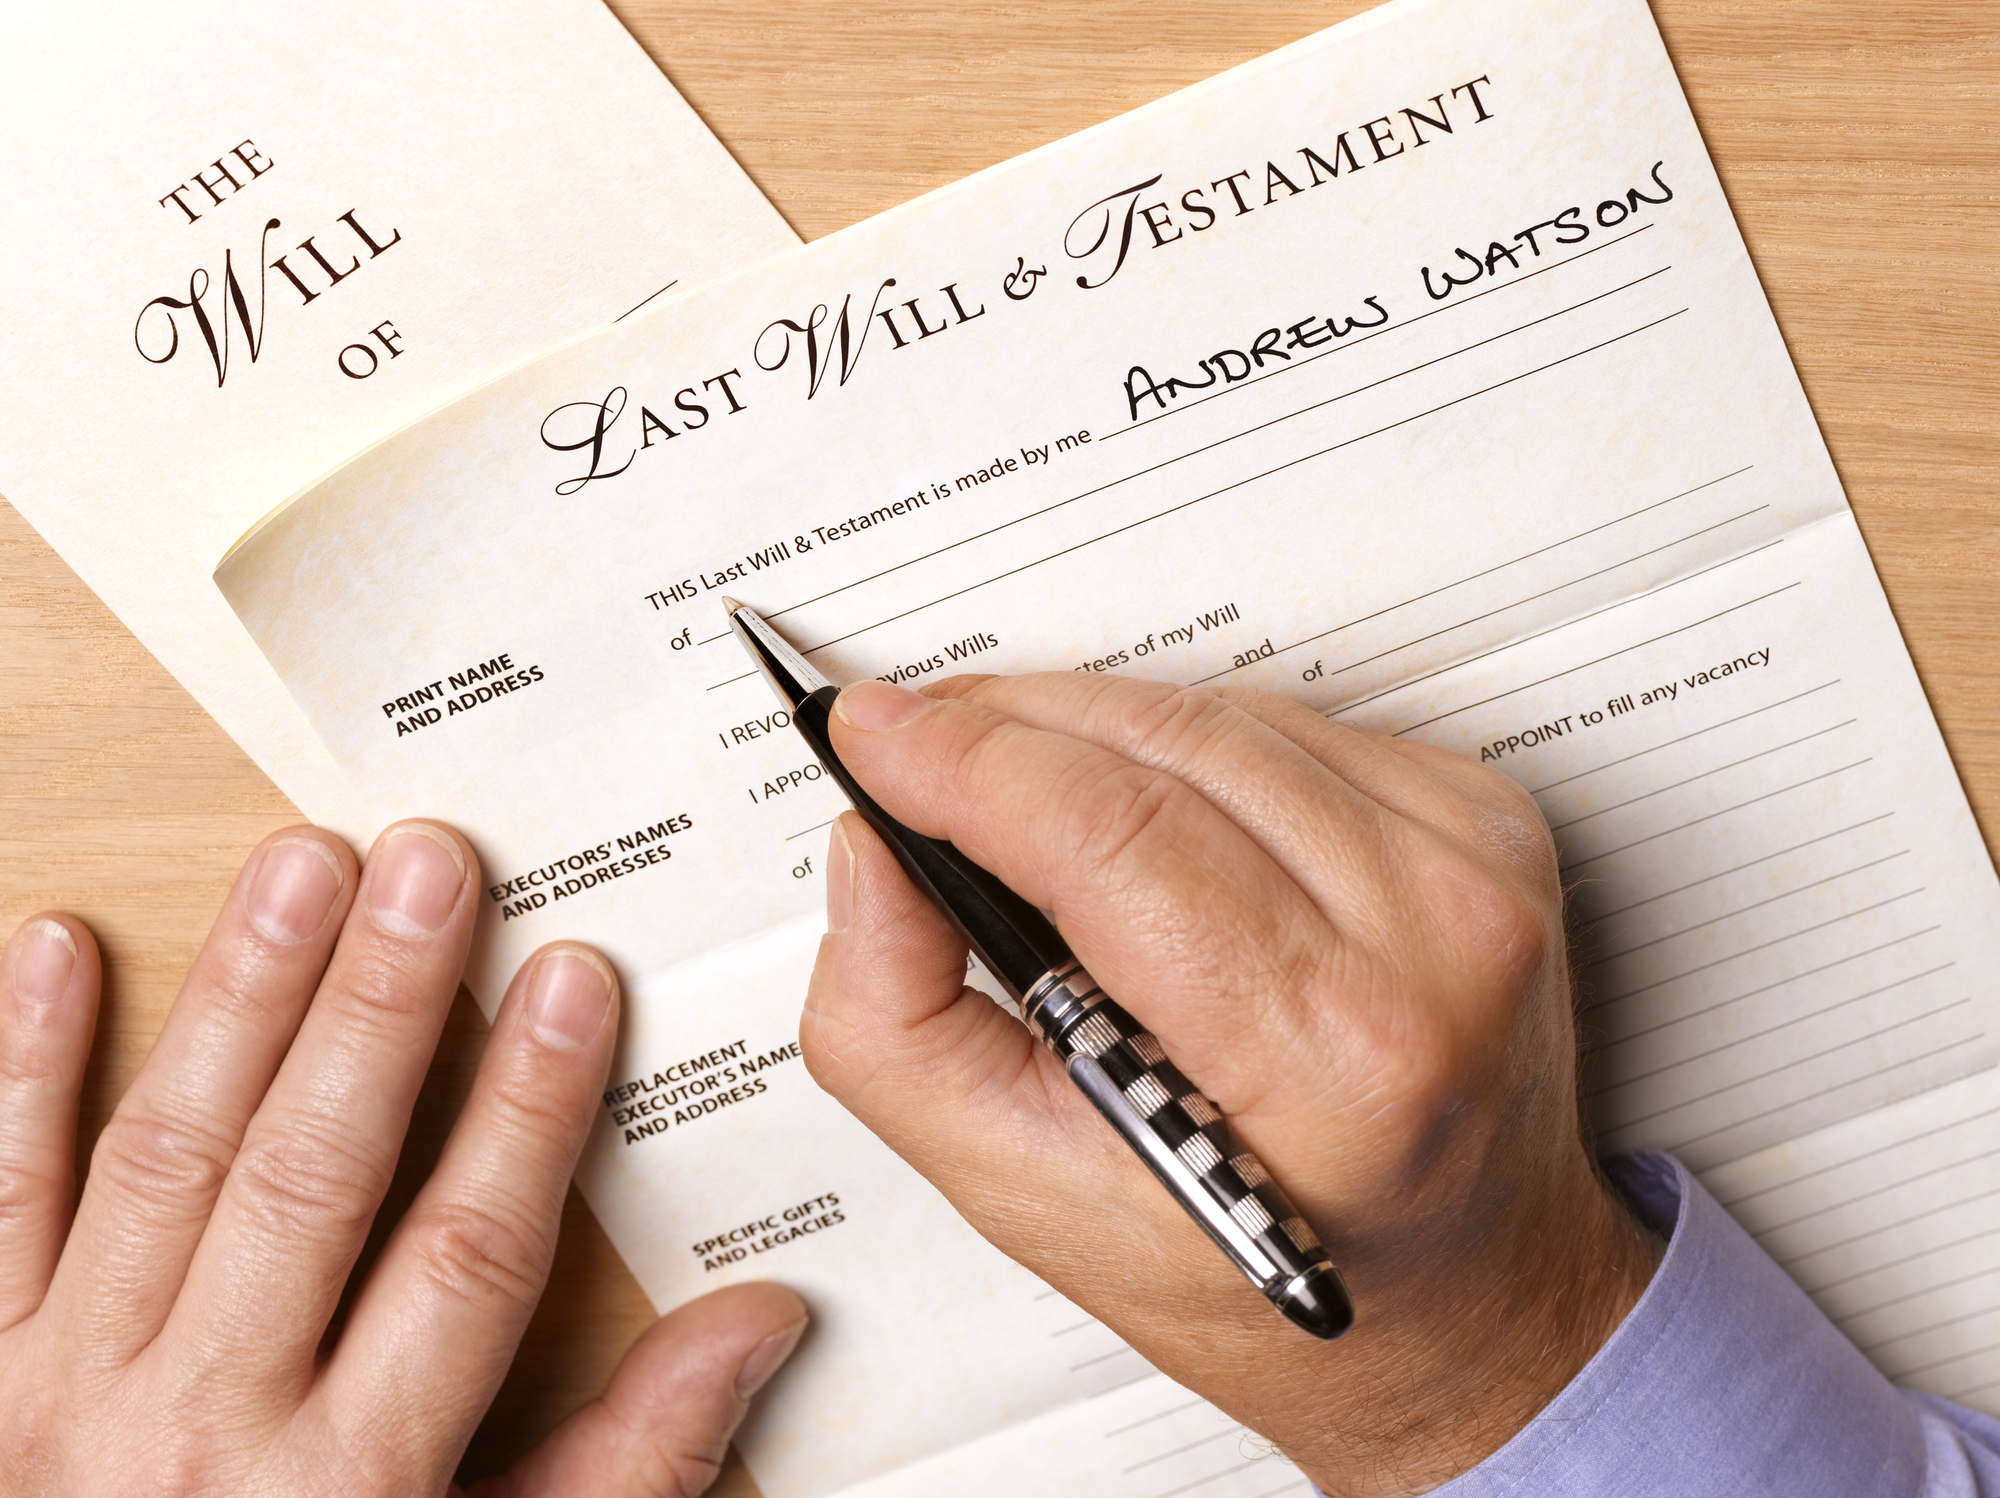 Last will and testament | Source: Getty Images